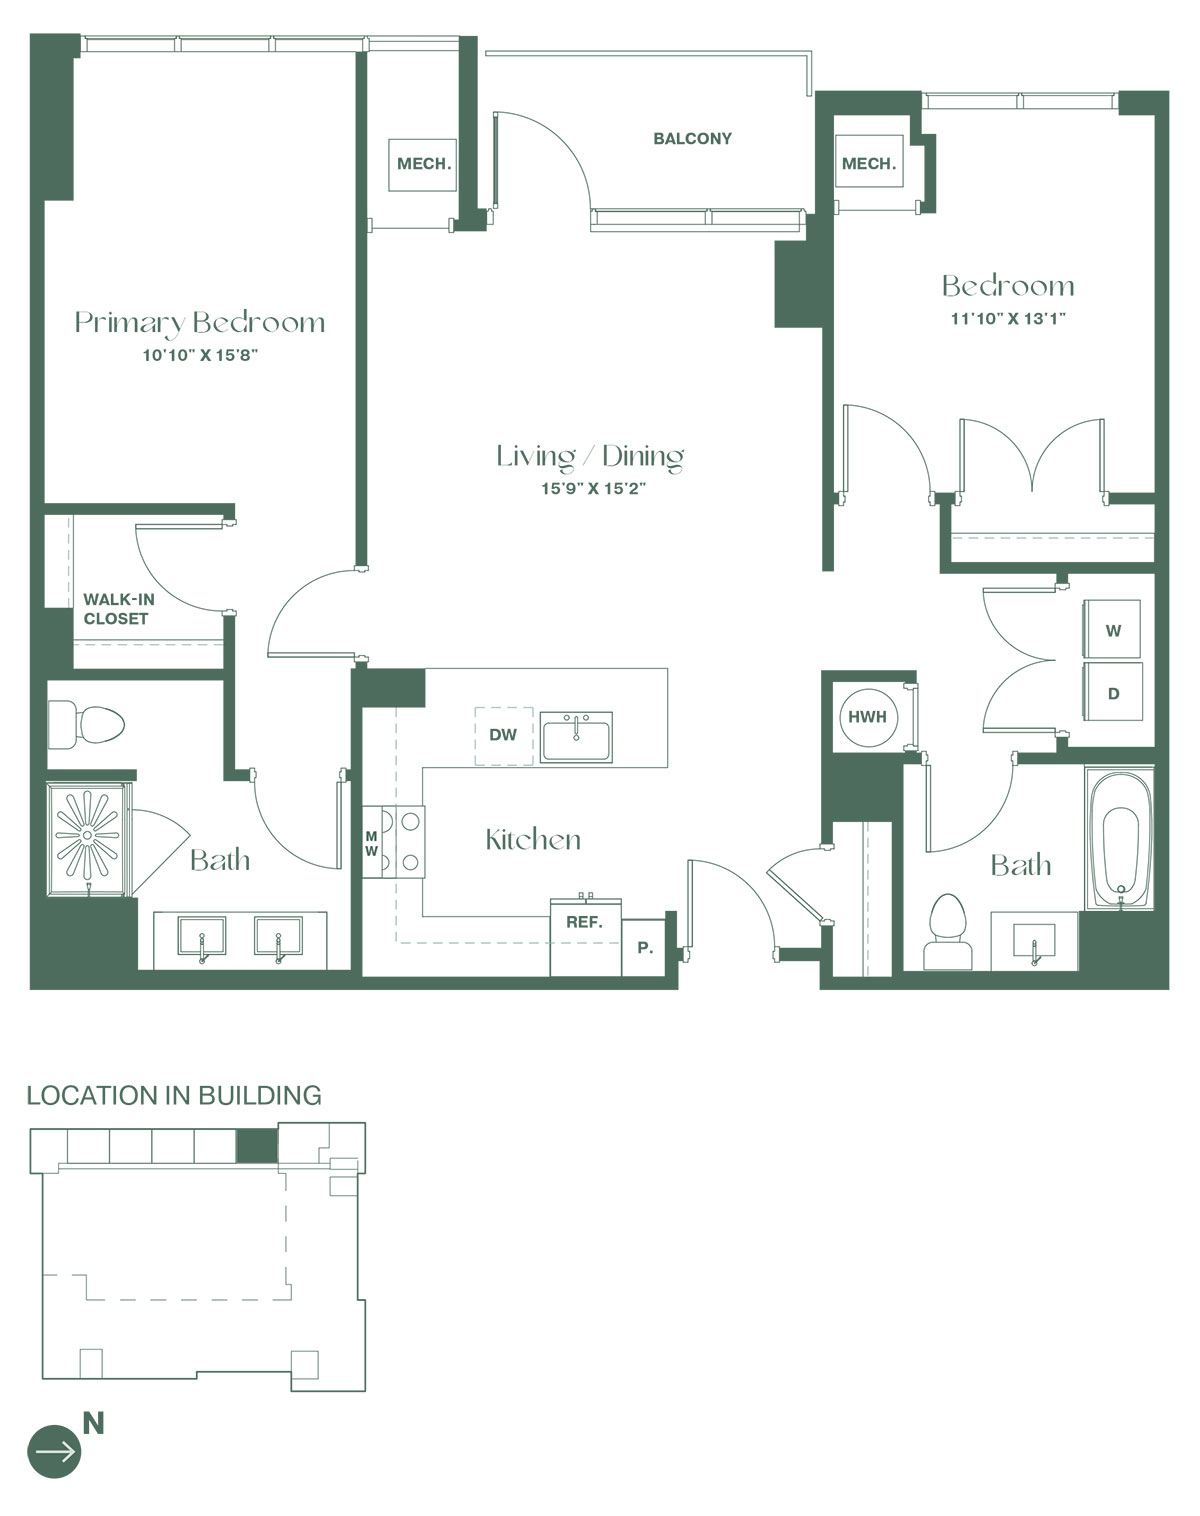 This floorplan for a two-bedroom, two-bathroom apartment at RVR at Xchange opens into a fully equipped kitchen with a dishwasher and pantry. Past the kitchen is a living and dining area with a balcony, the living and dining room, full bathroom and a bedroom with a closet. To the left is the entrance to the primary bedroom suite, with a large walk-in closet, and a full bathroom.